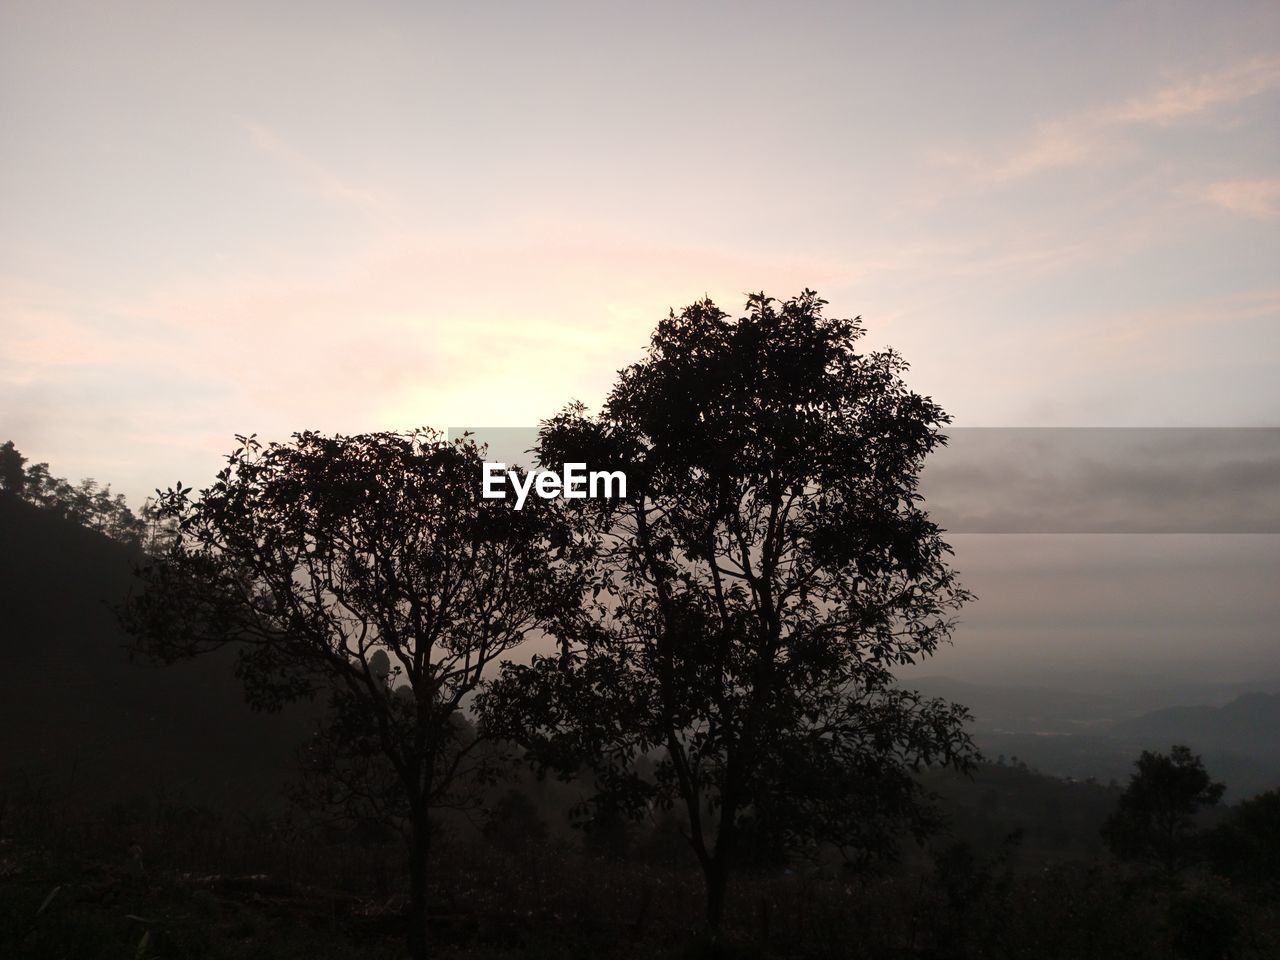 tree, sky, plant, nature, morning, cloud, environment, beauty in nature, landscape, dawn, scenics - nature, tranquility, no people, horizon, silhouette, sunrise, land, tranquil scene, sunlight, outdoors, hill, field, non-urban scene, fog, savanna, growth, forest, rural area